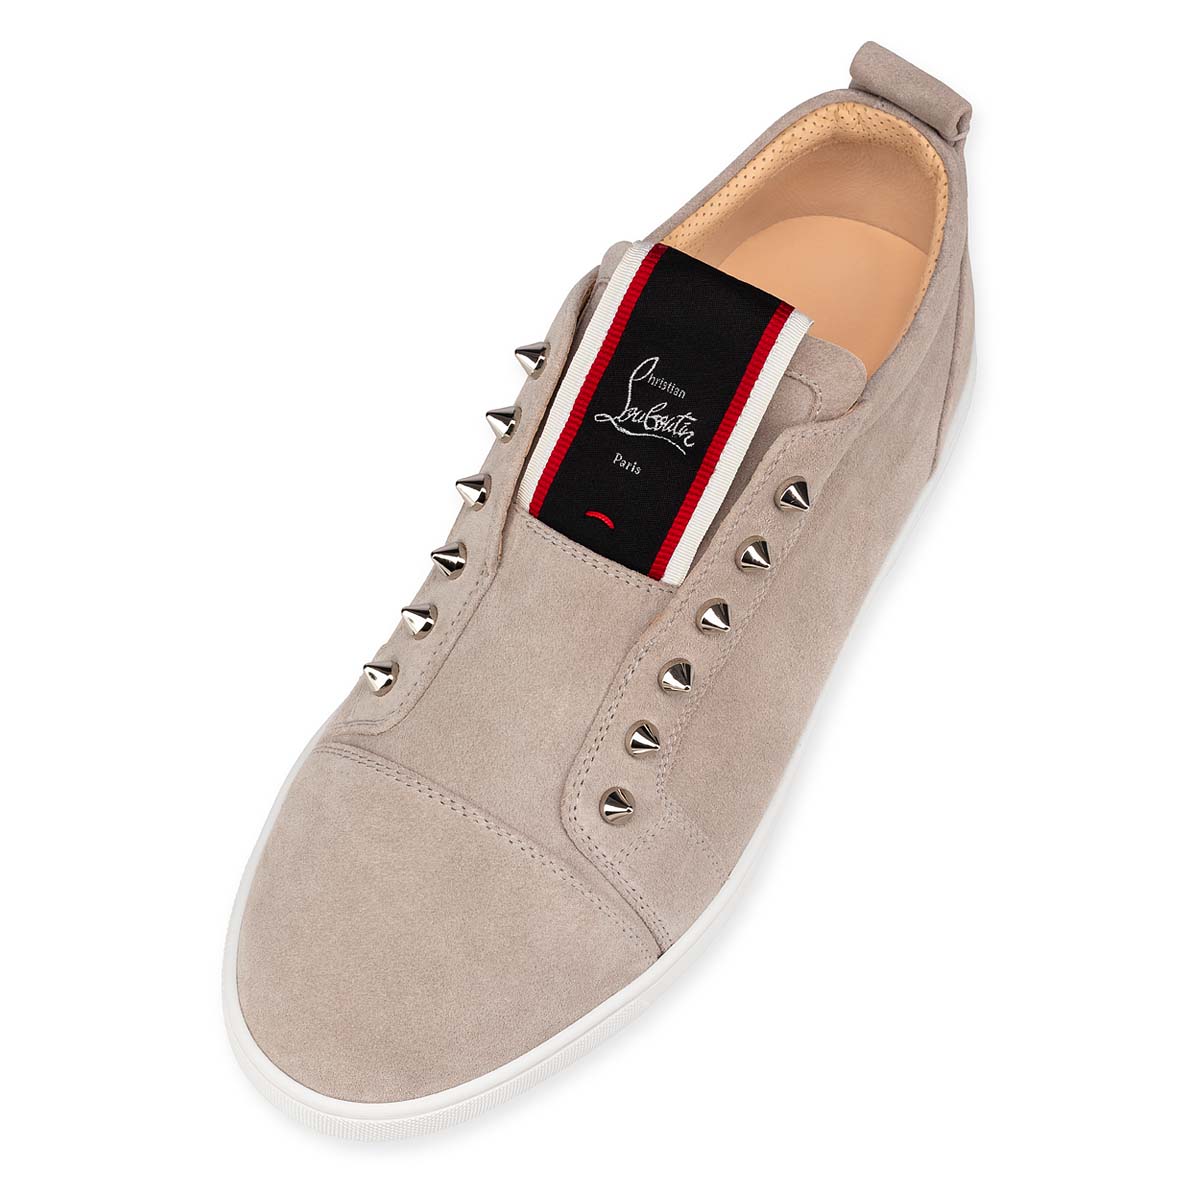 F.A.V Fique A Vontade Grey Leather - Shoes - Men - Christian Louboutin